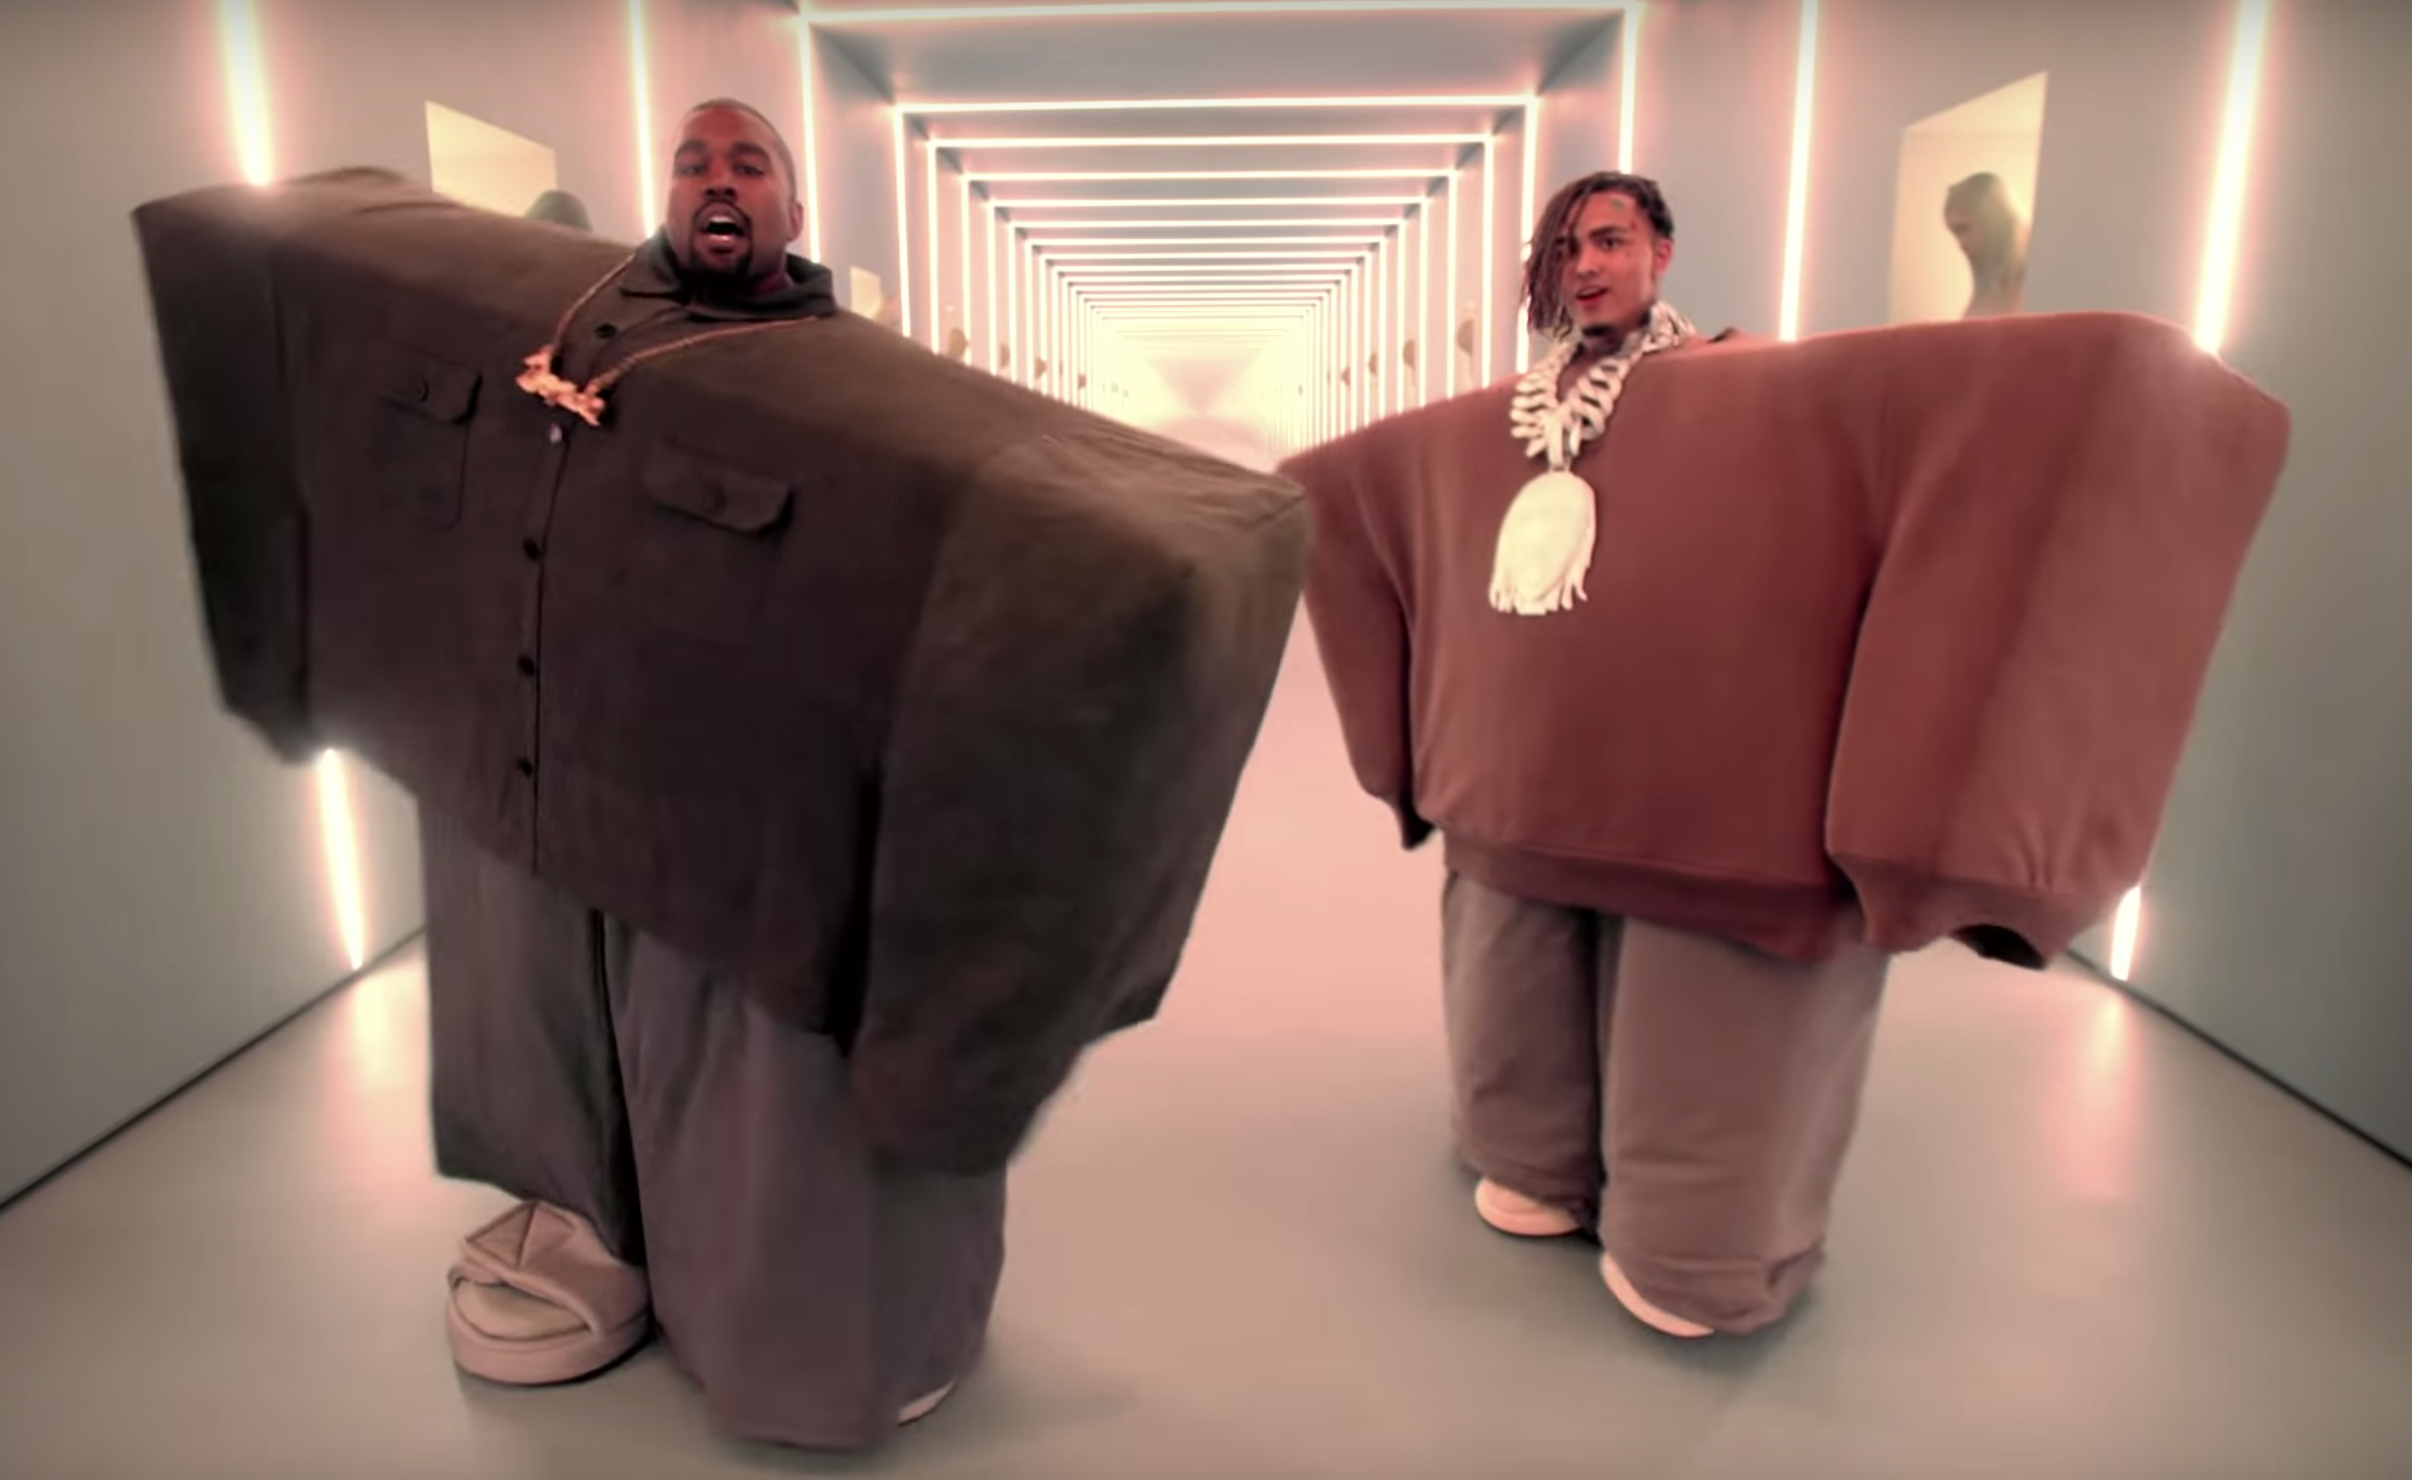 Kanye West and Lil Pump 'I Love It' Video: The Absurdity Is Deeper Than You  Think